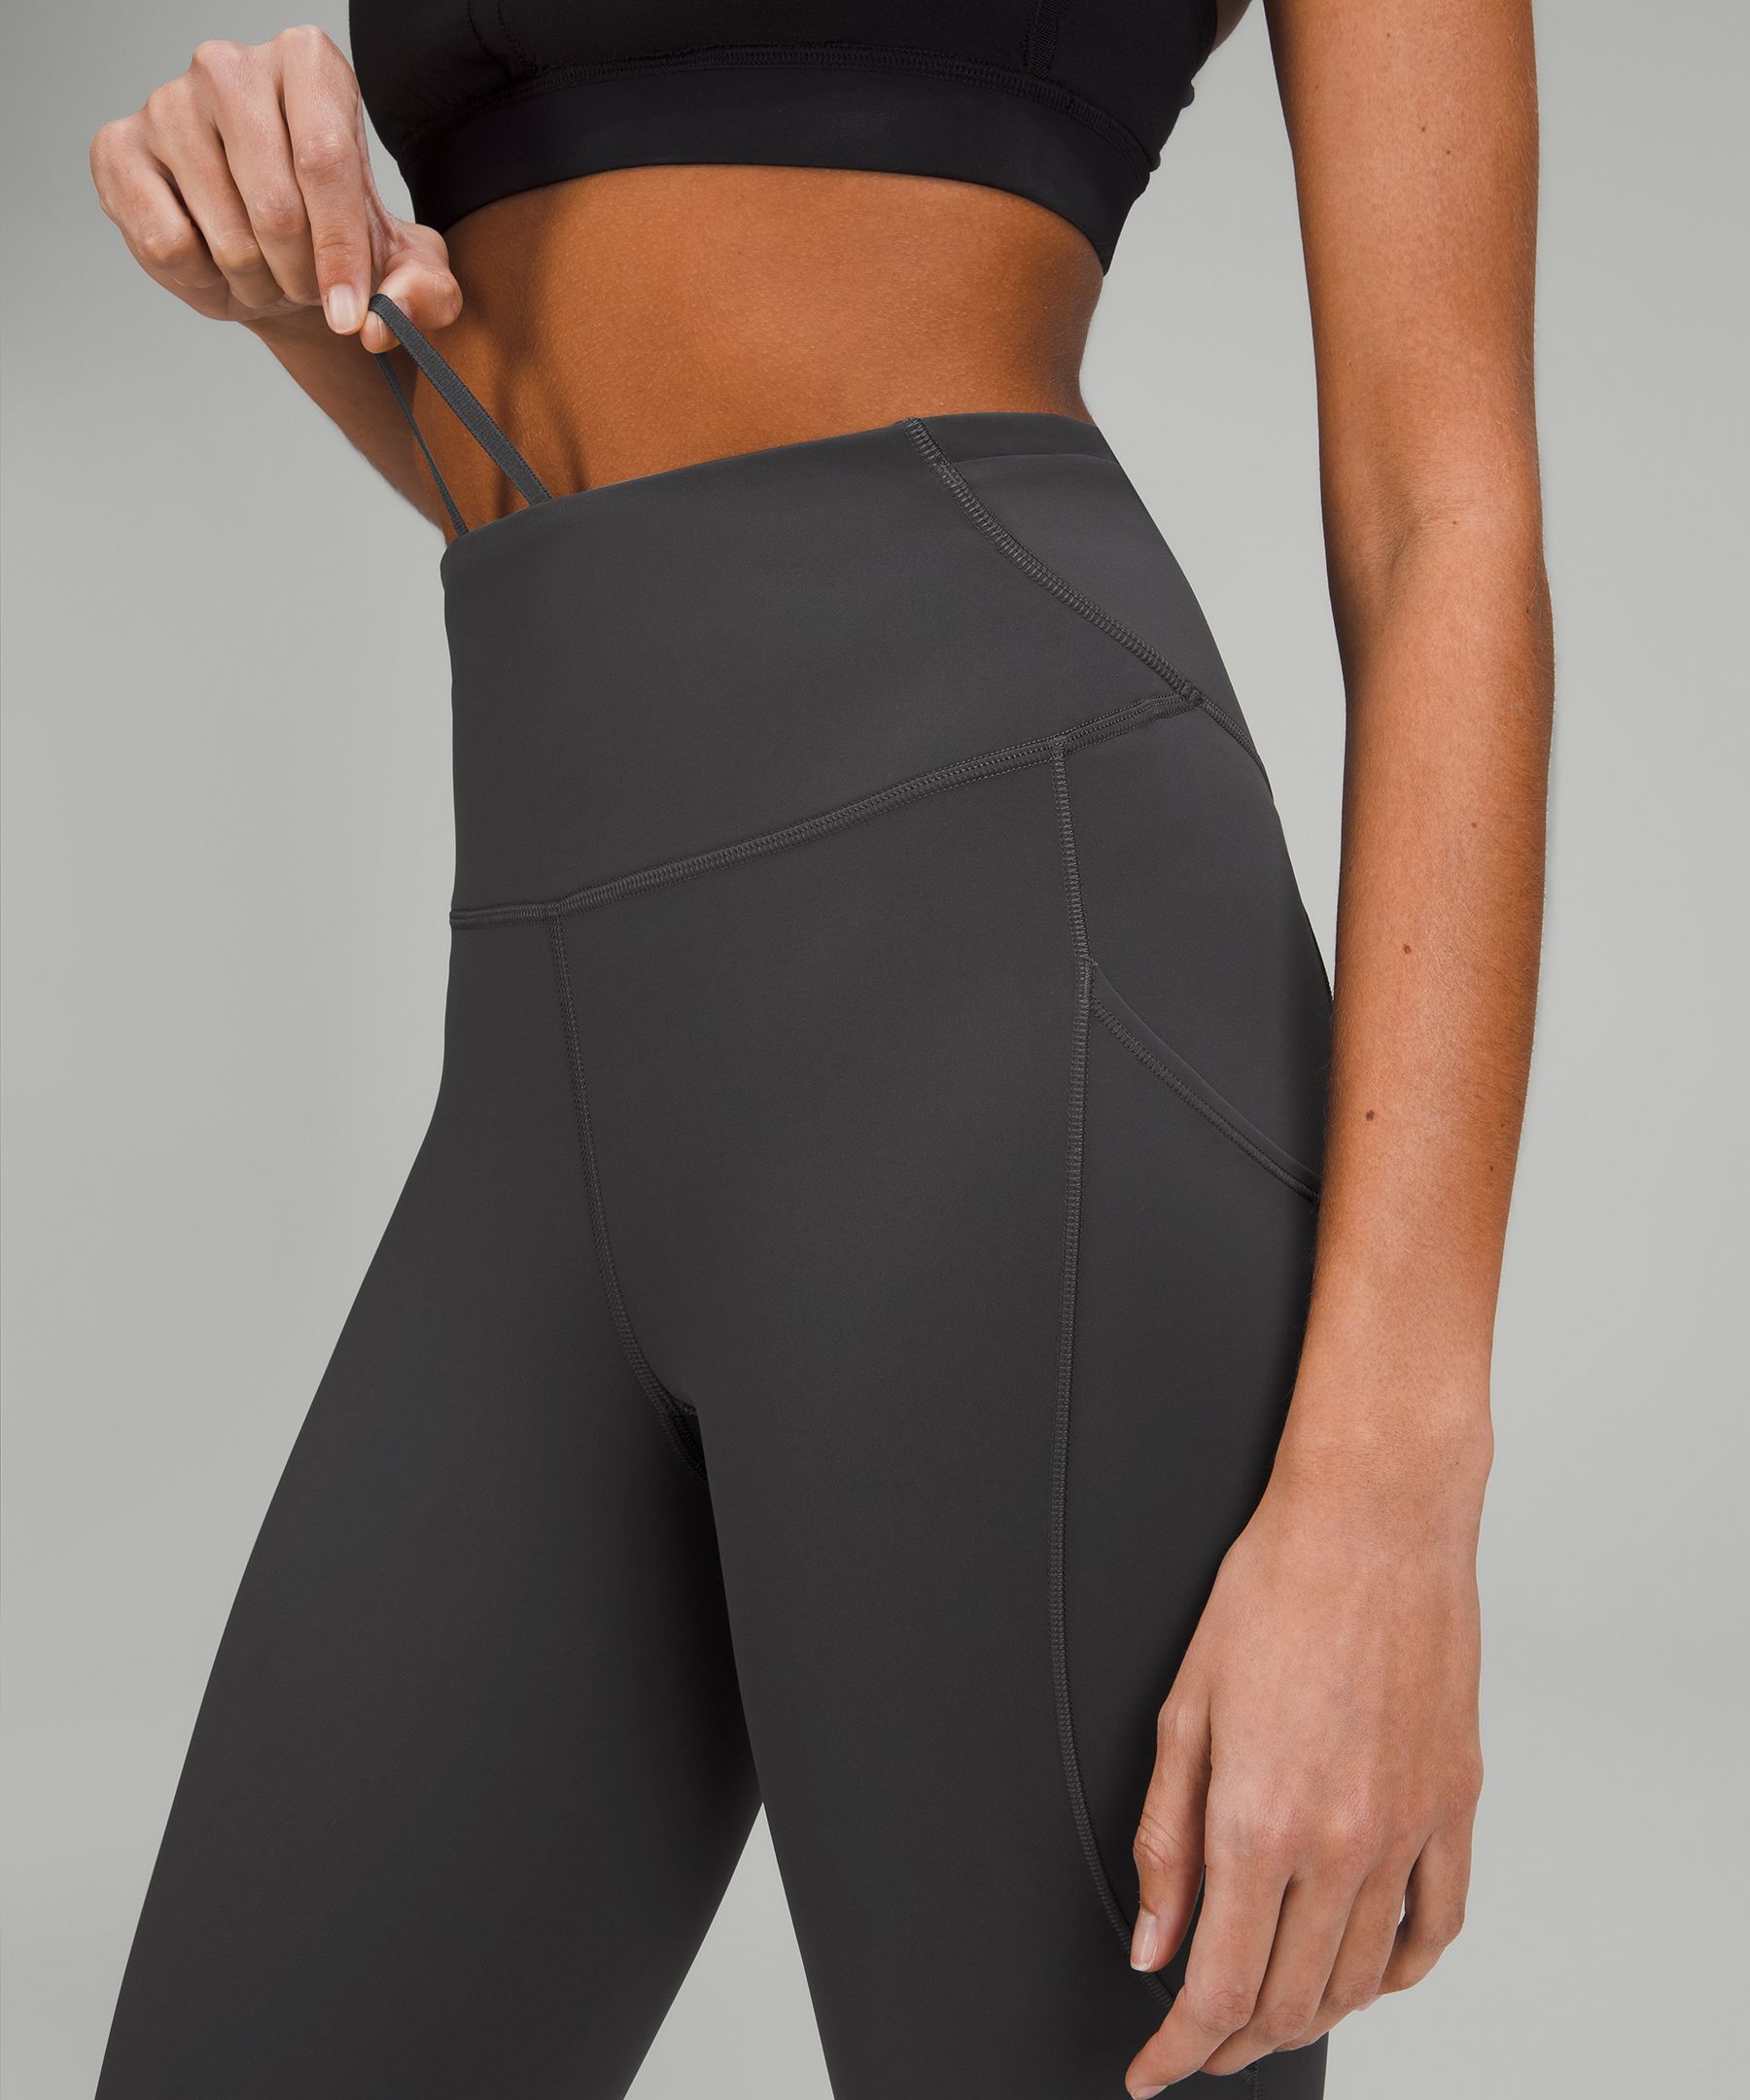 Lululemon Fast and Free High-Rise Tight 25” Pockets Updated Size